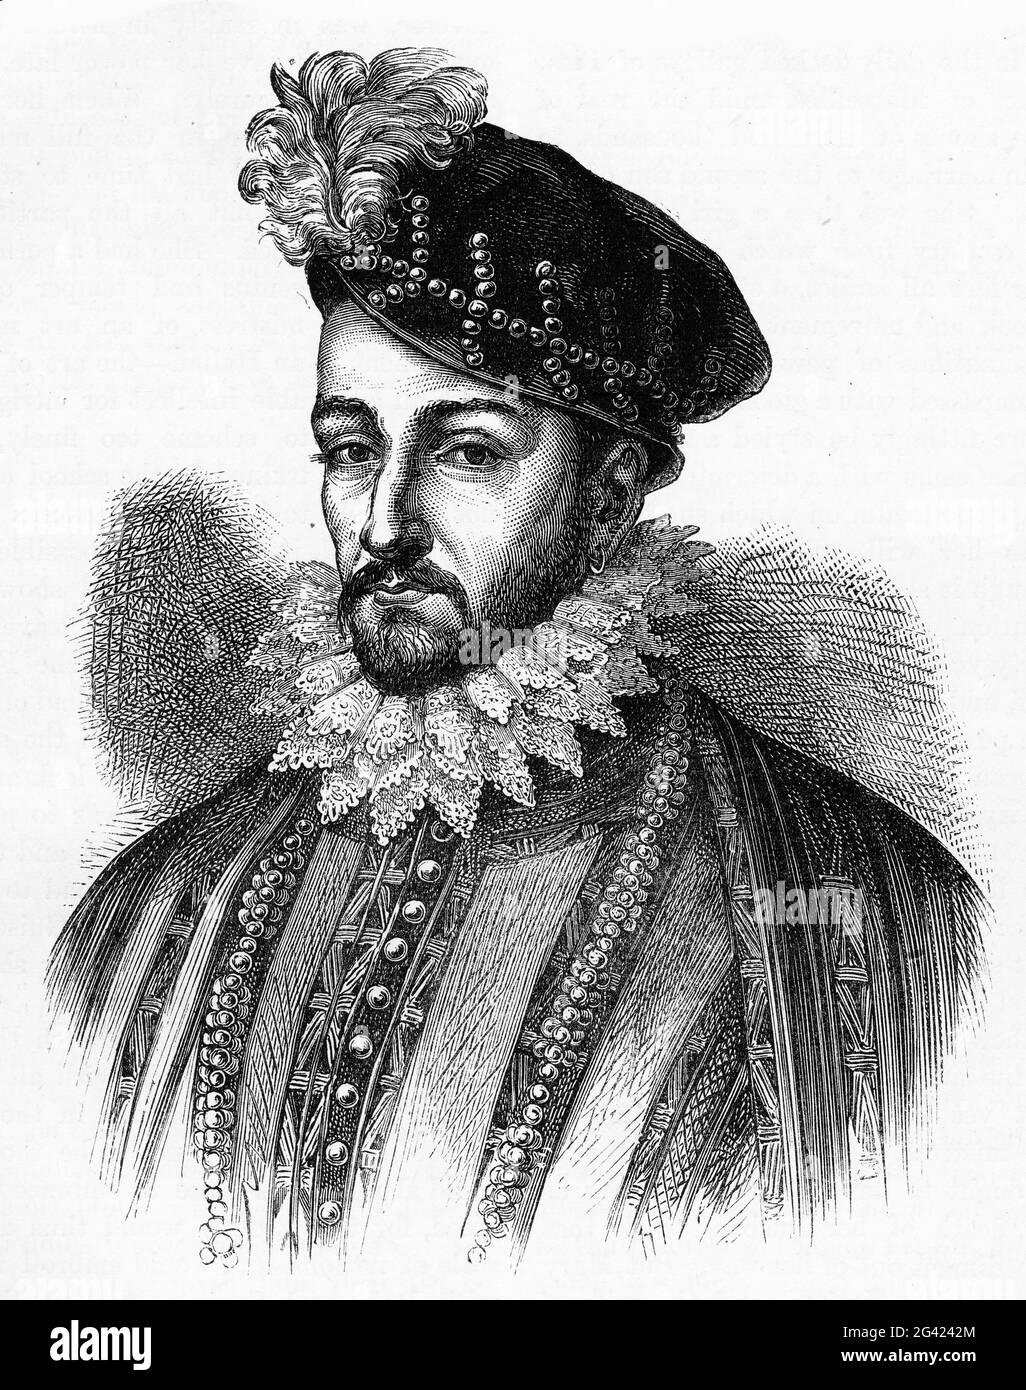 Engraving of Charles IX (Charles Maximilien; 1550 – 1574) King of France from 1560 until his death in 1574 from tuberculosis. He ascended the throne of France upon the death of his brother Francis II in 1560. Stock Photo